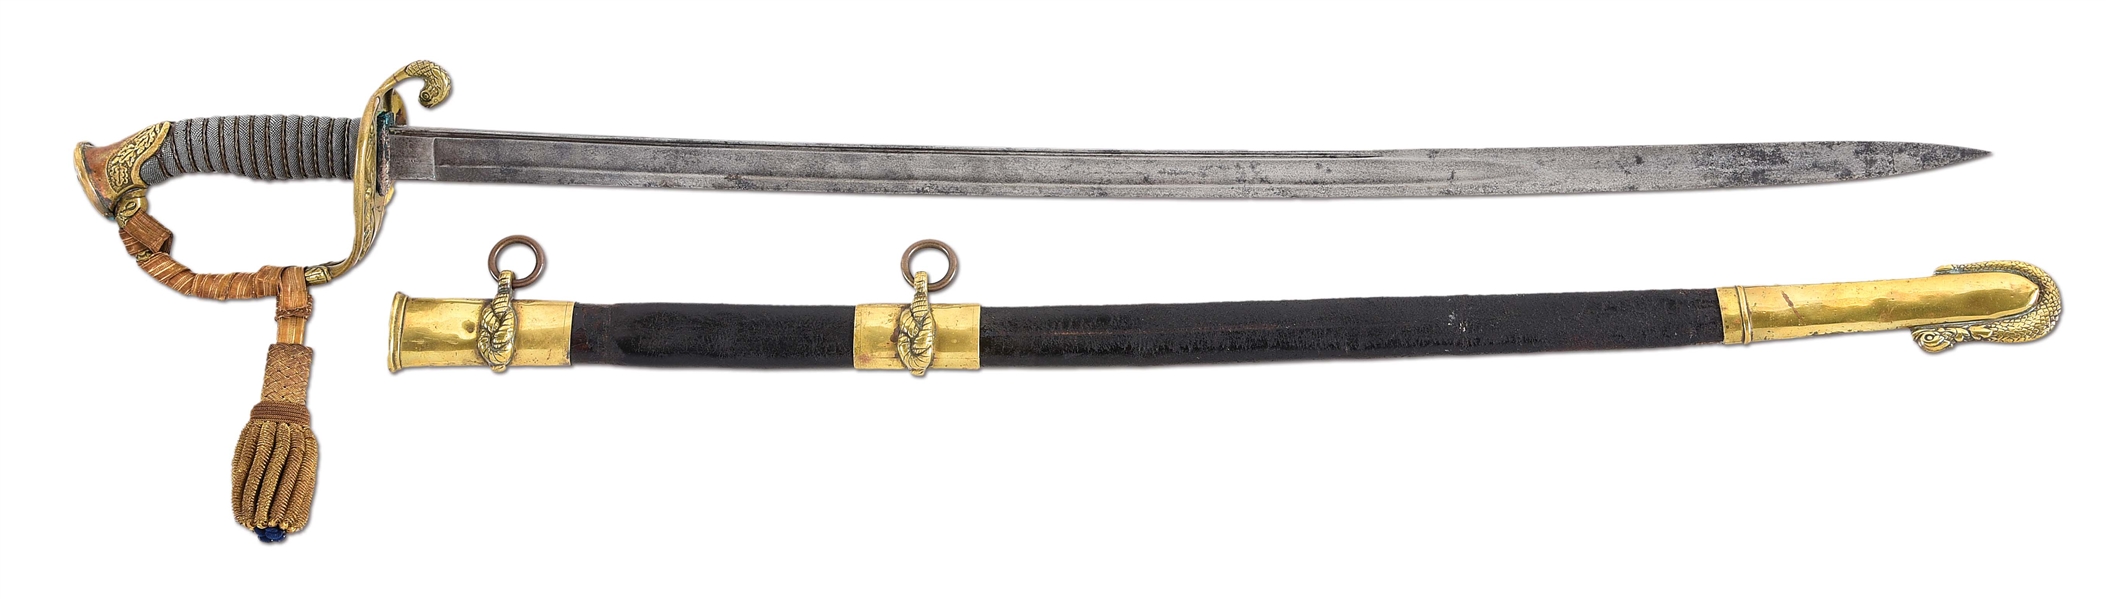 US CIVIL WAR M1852 NAVAL OFFICERS SWORD PRESENTED TO ADMIRAL HENRY W. LYON, CAREER OFFICER FROM CIVIL WAR-SPANISH AMERICAN WAR.